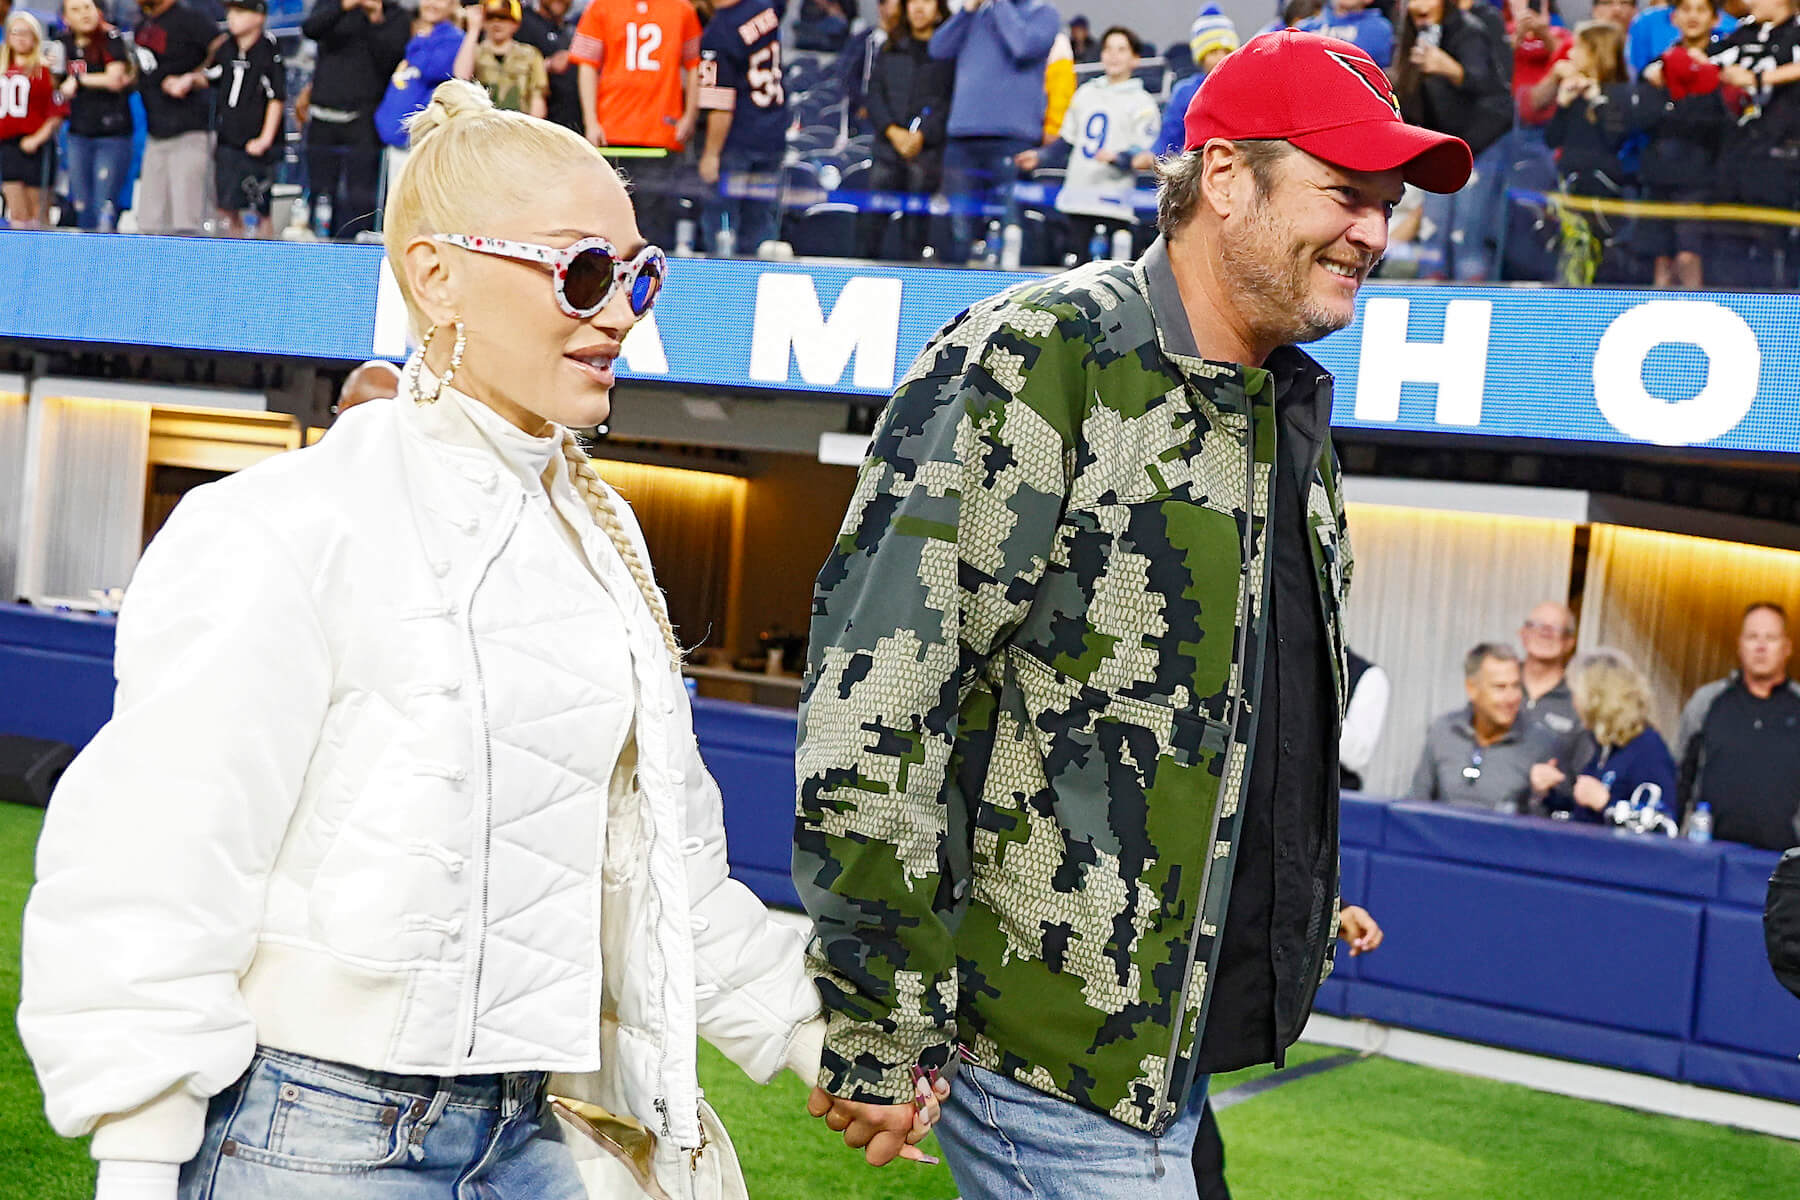 Gwen Stefani and Blake Shelton walking on a football field at a game between the Los Angeles Rams and the Arizona Cardinals